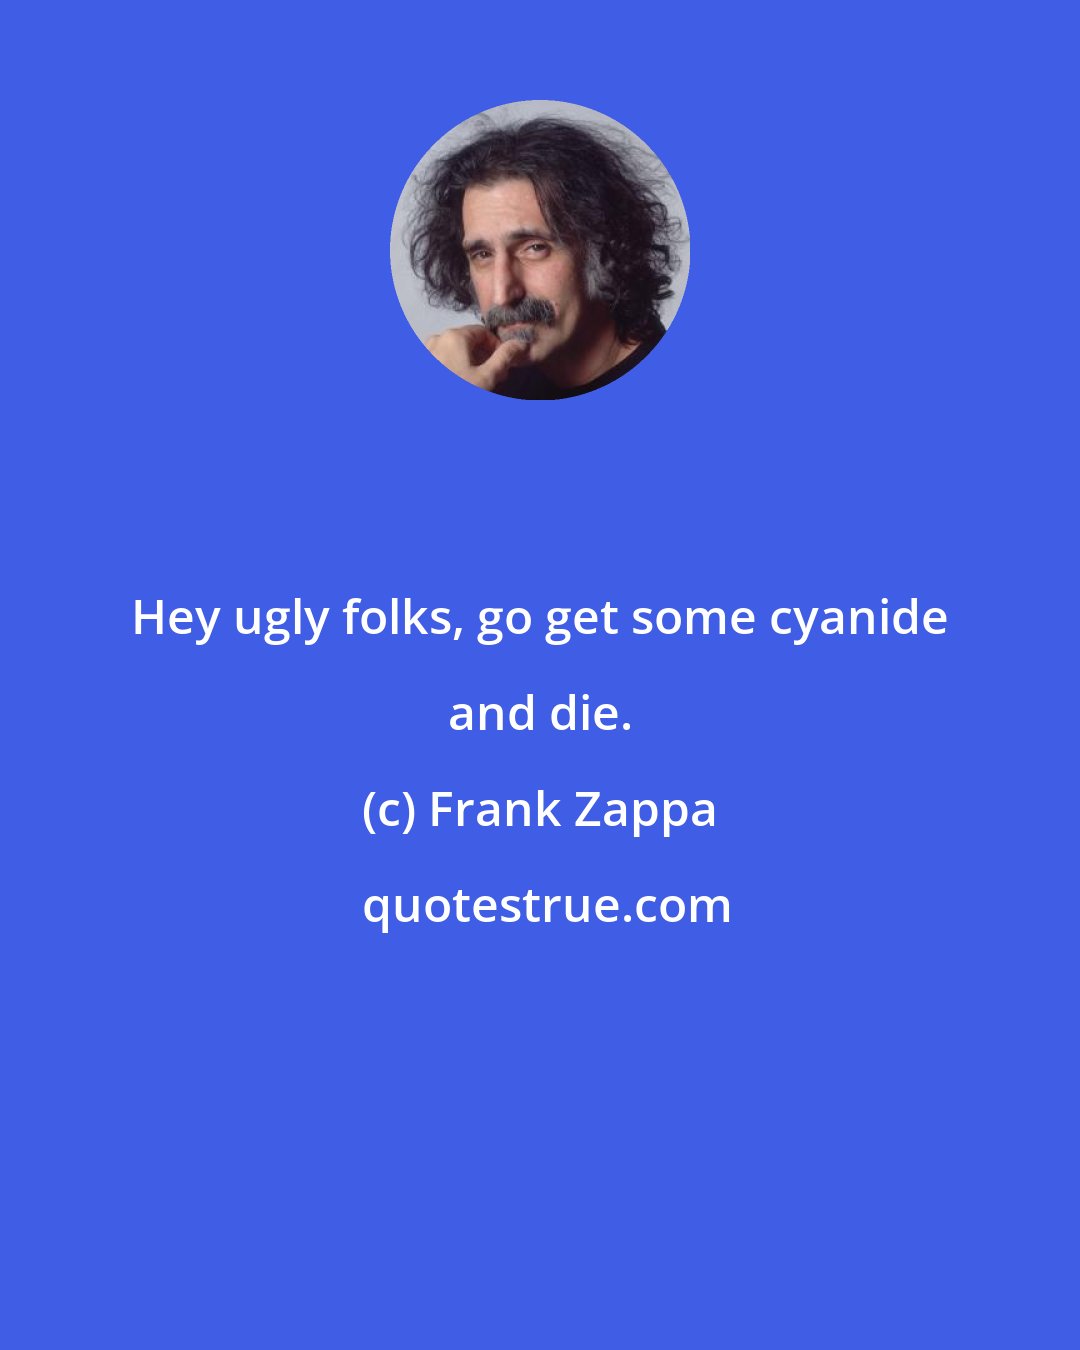 Frank Zappa: Hey ugly folks, go get some cyanide and die.